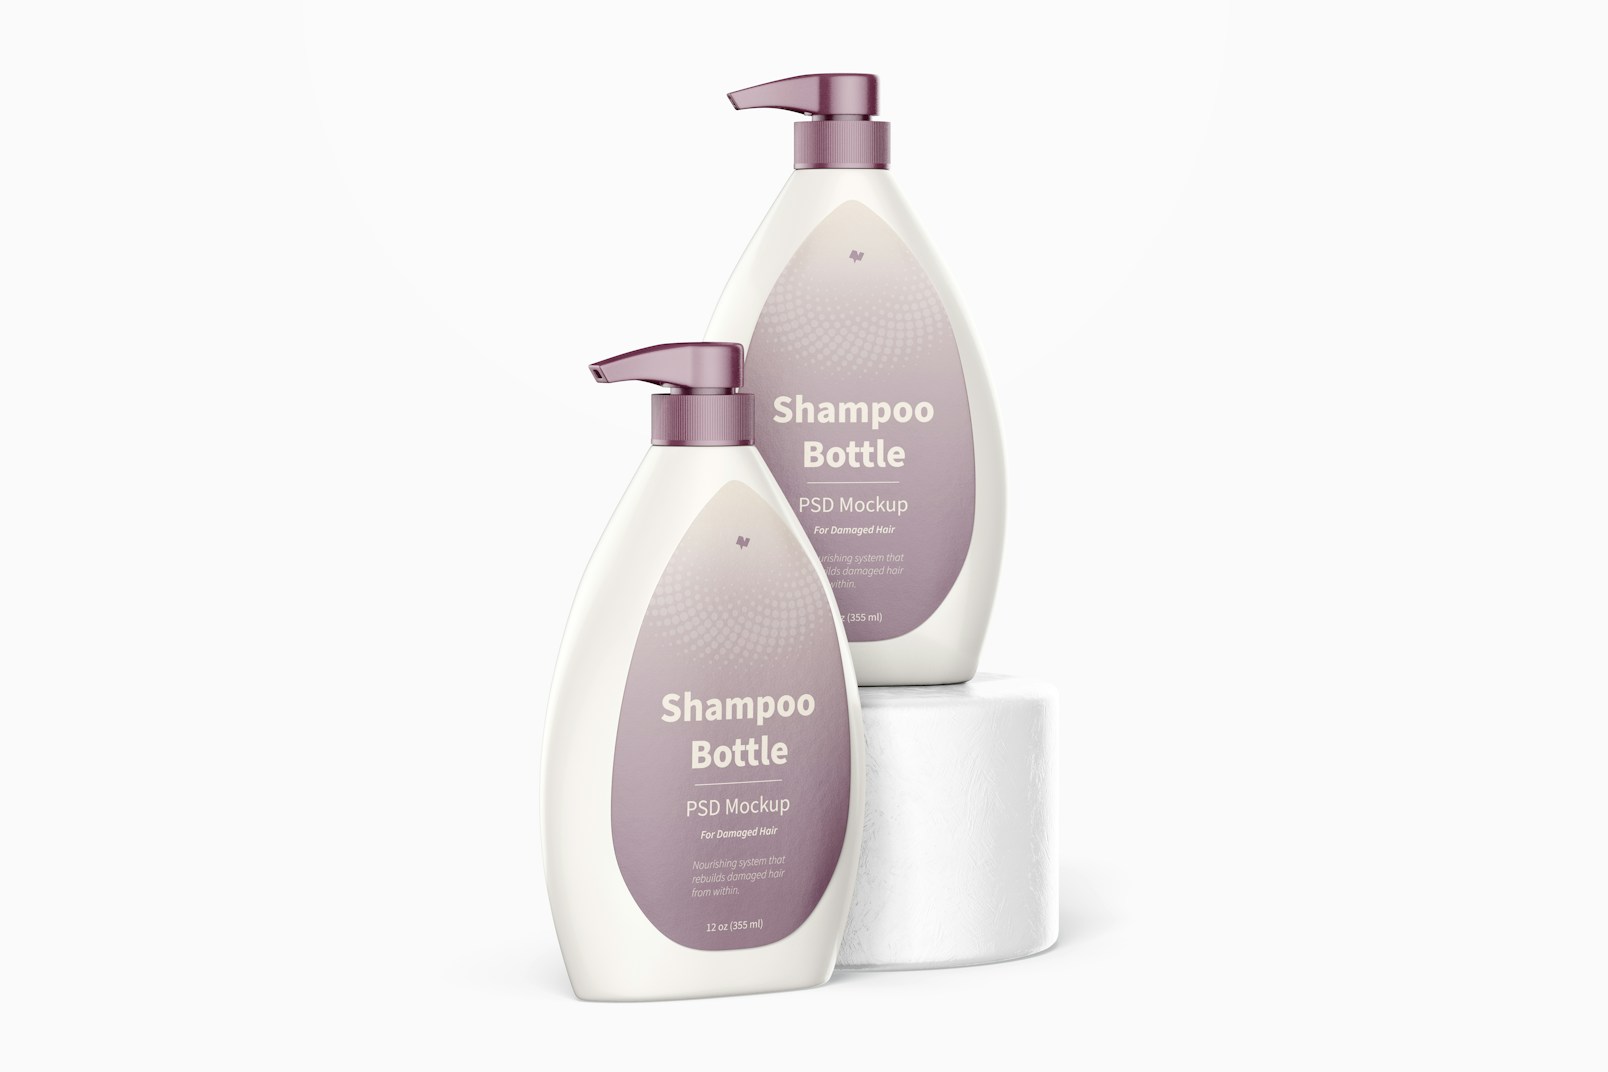 Shampoo Bottles with Pump Mockup, Perspective View